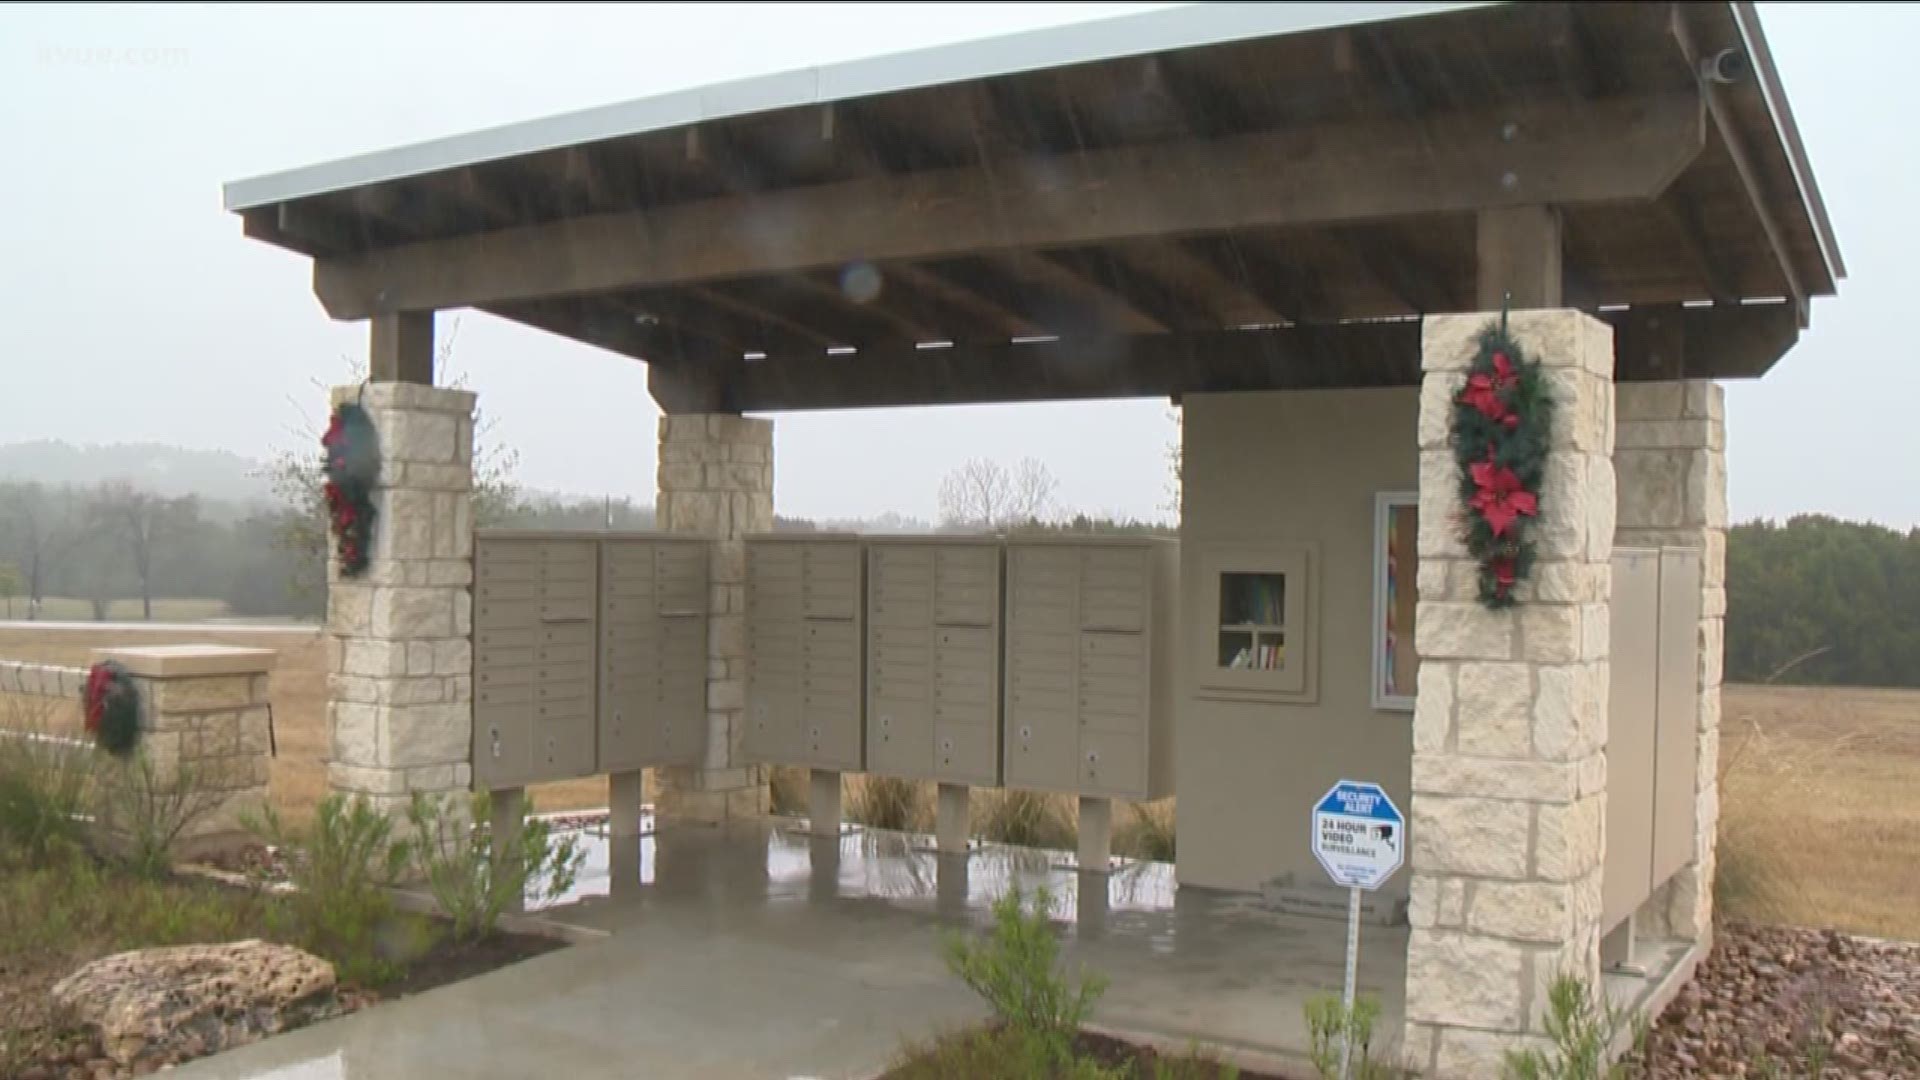 A Southwest Austin neighborhood is now the target of a second mail theft in less than three months.